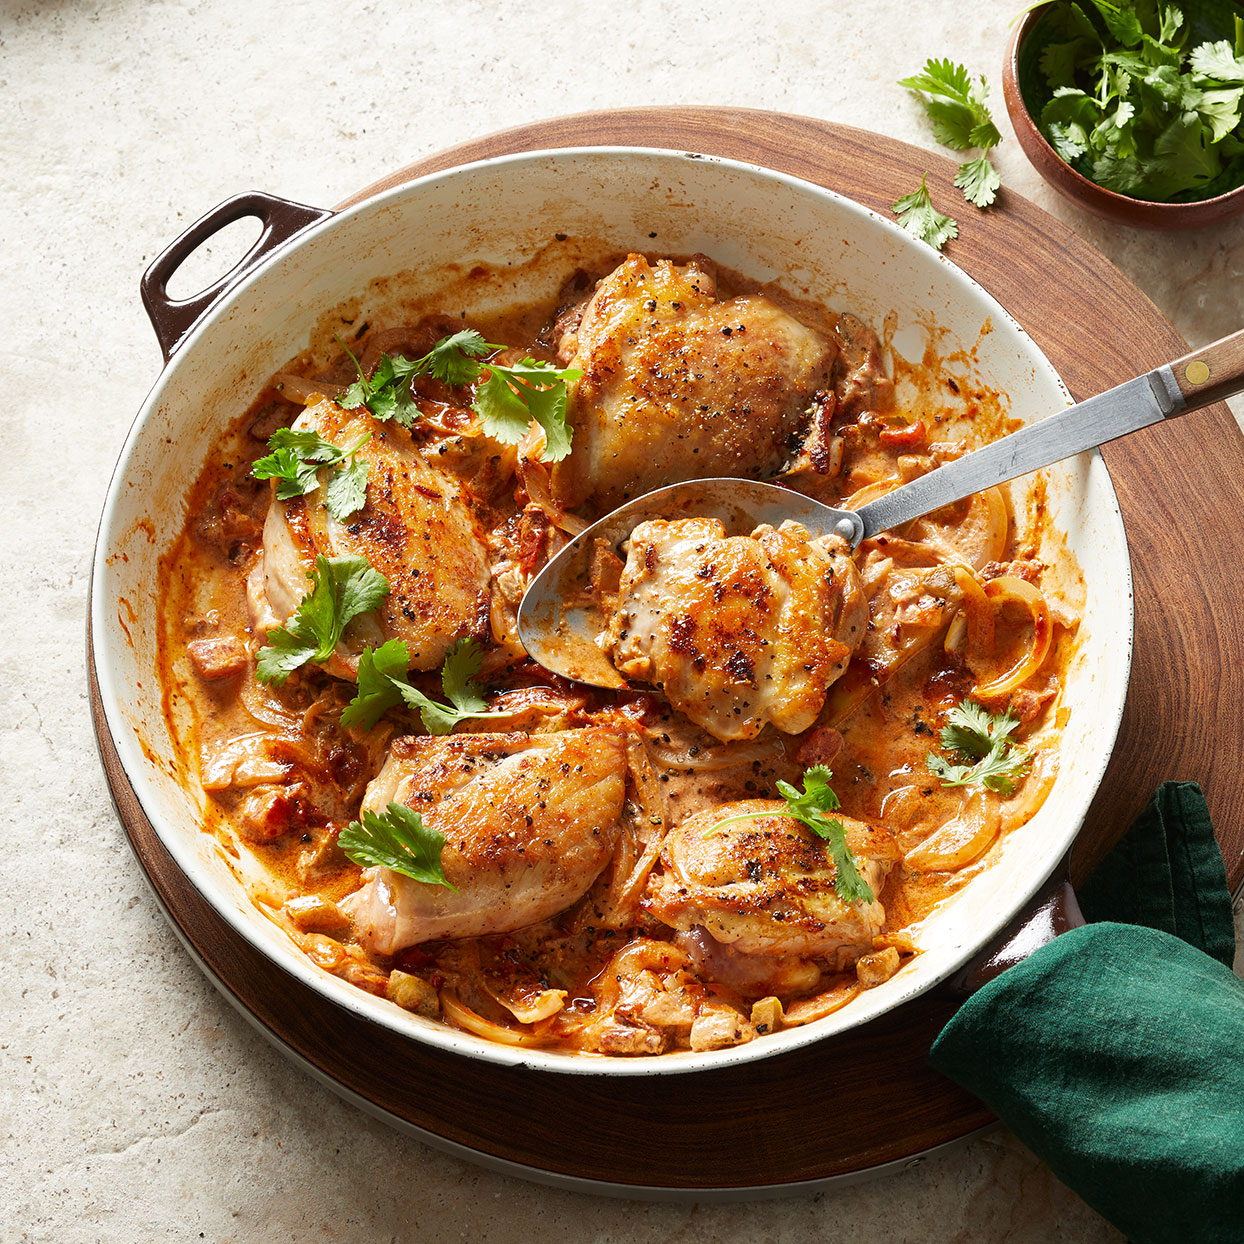 <p>Smoky chipotle is the star of this one-skillet chicken thigh recipe. Great for weeknight dinners, this can be on the table in under 30 minutes. Serve with tortillas or over rice or low-carb cauliflower rice with a simple cabbage slaw.</p>
                          